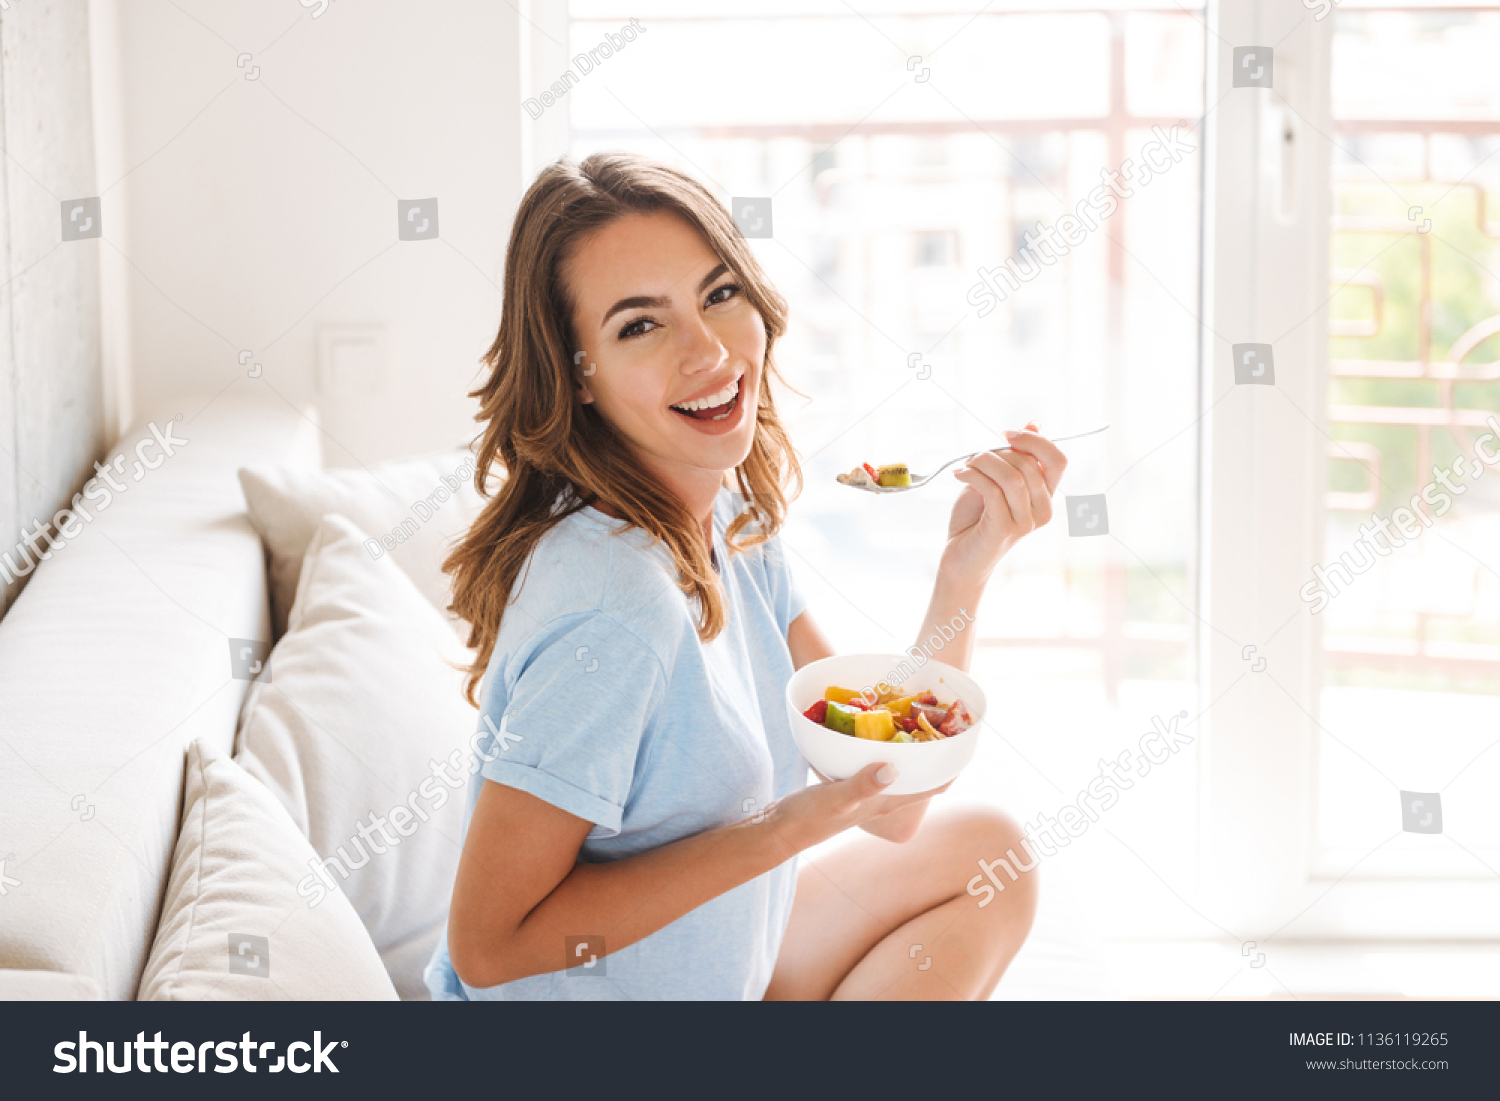 Cheerful young woman eating healthy breakfast while sitting on a couch at home #1136119265